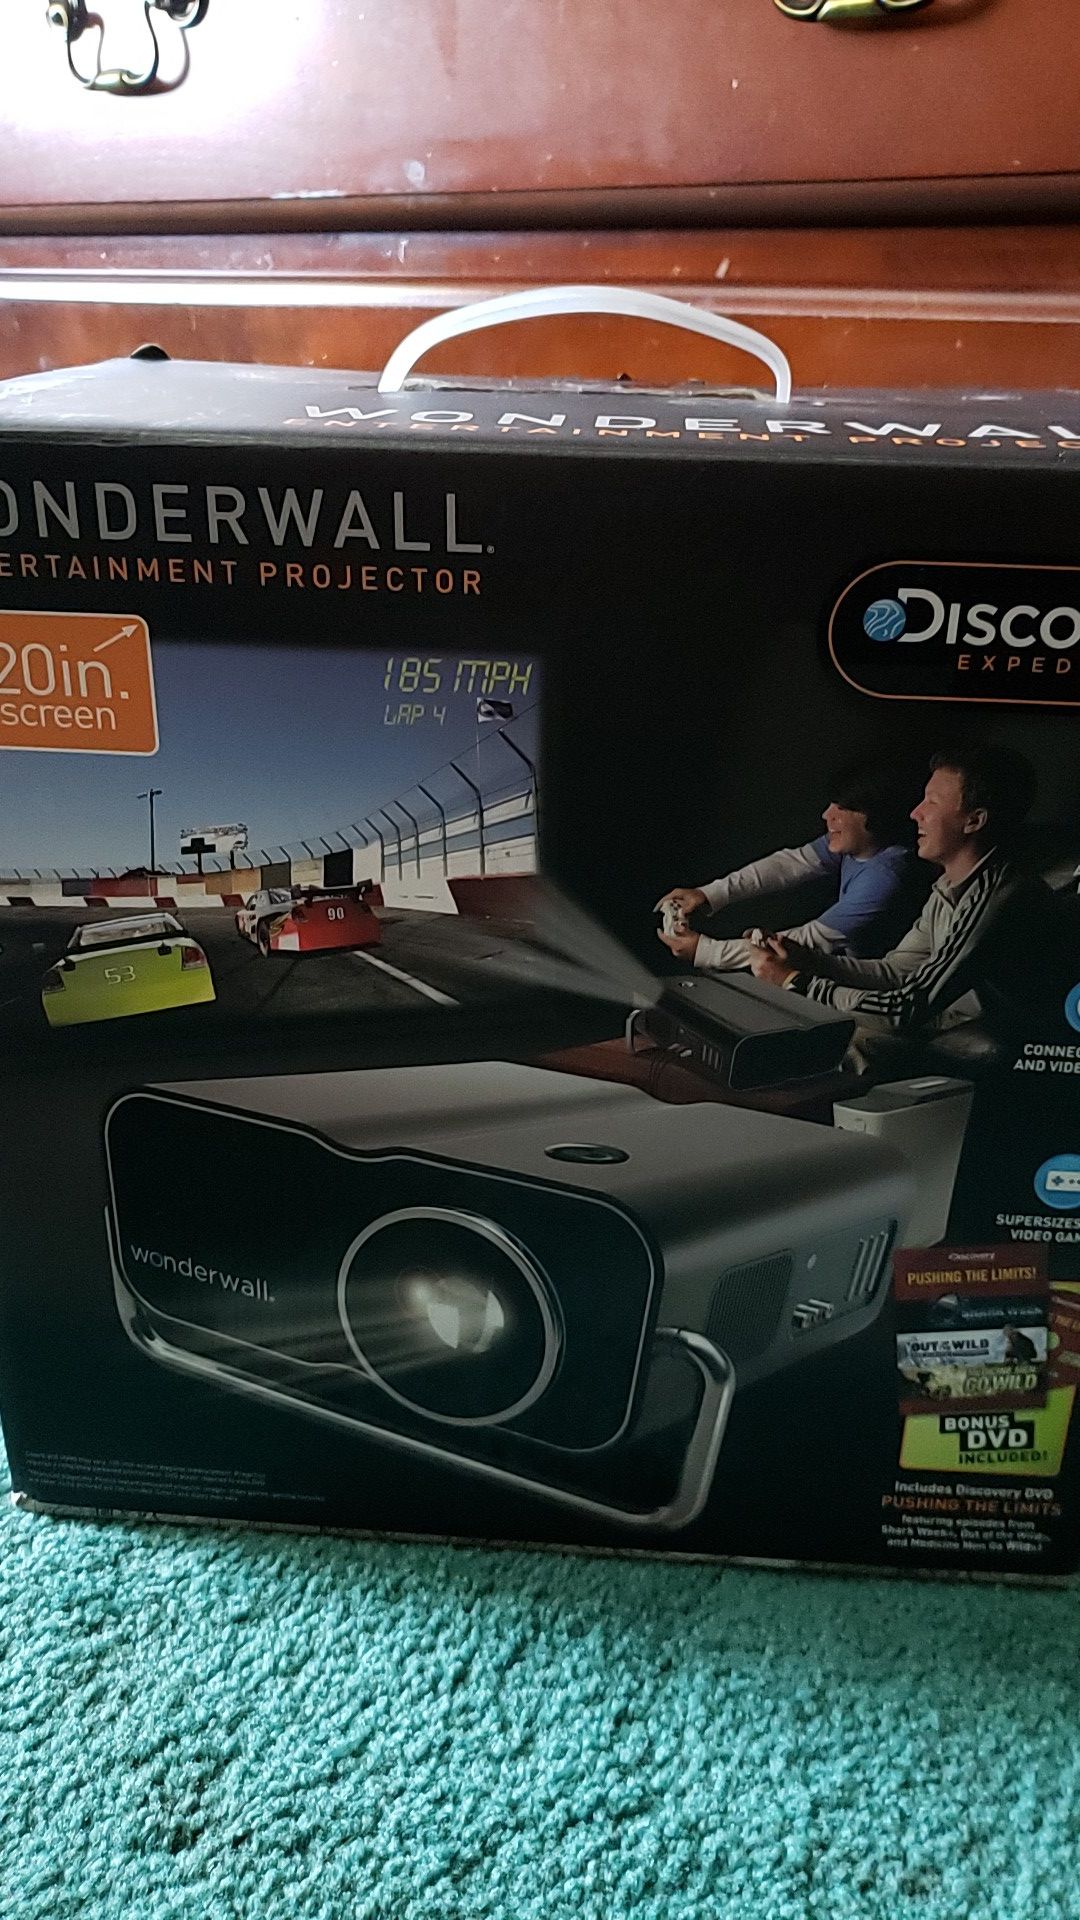 Discovery Expedition wonderwall projector.